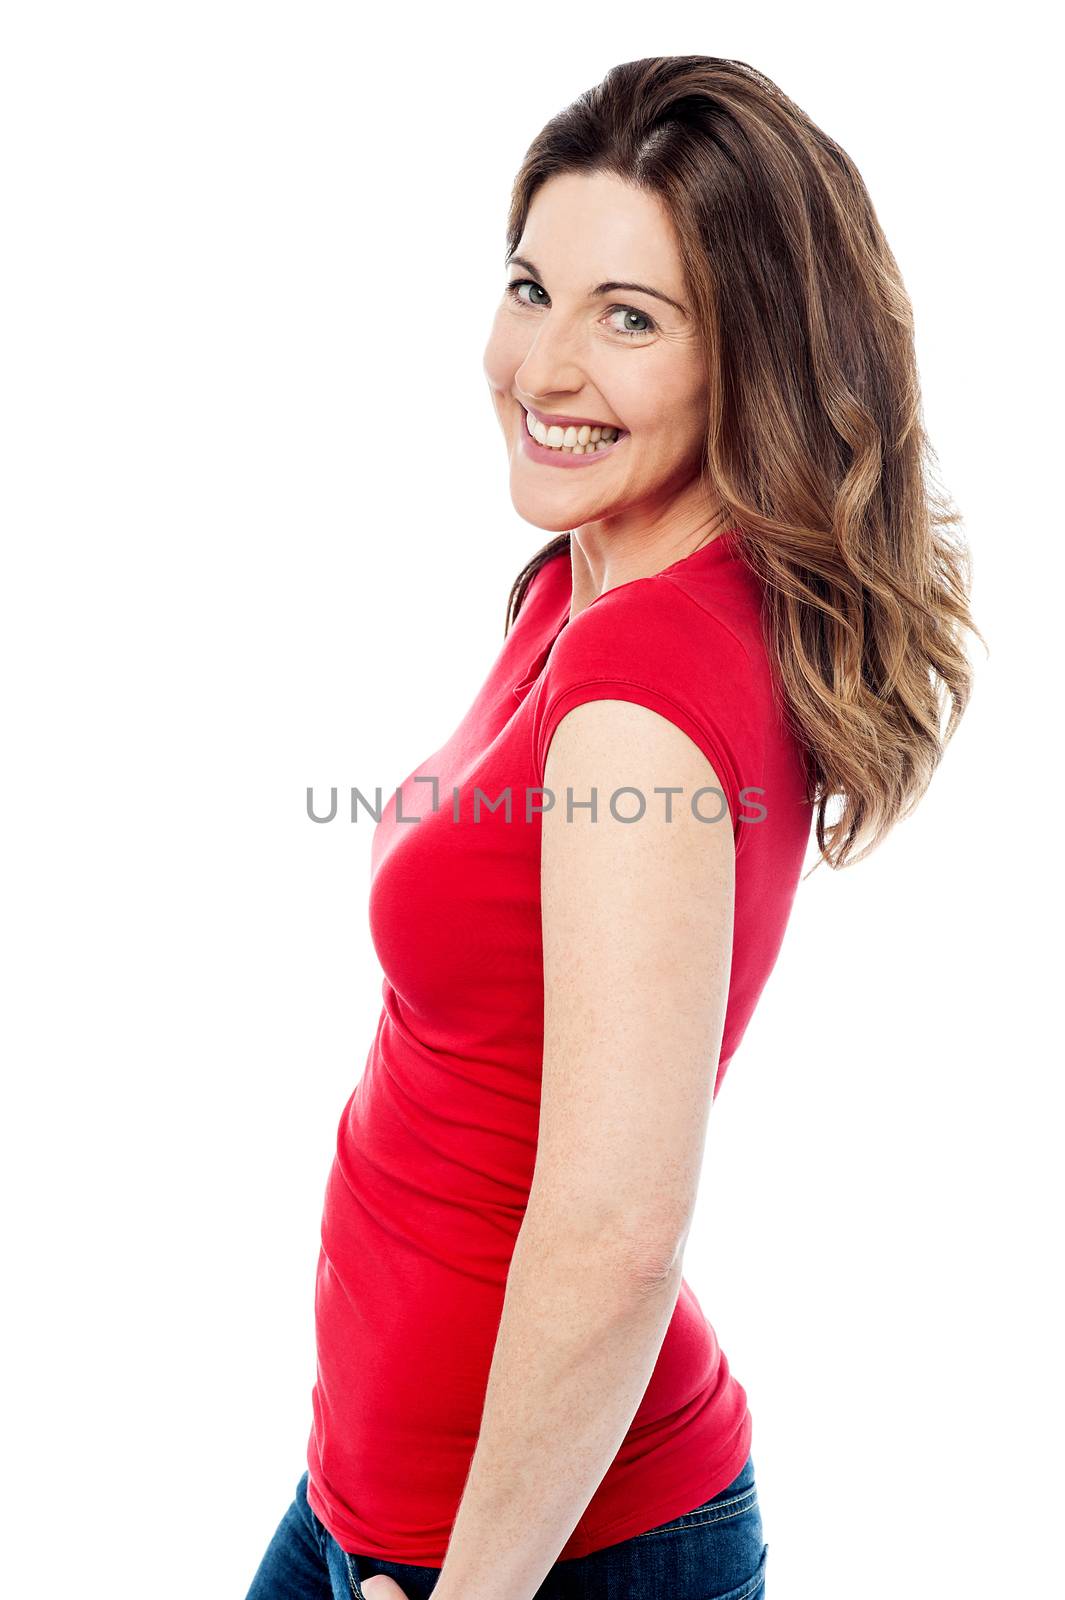 Sideways of cheerful woman by stockyimages